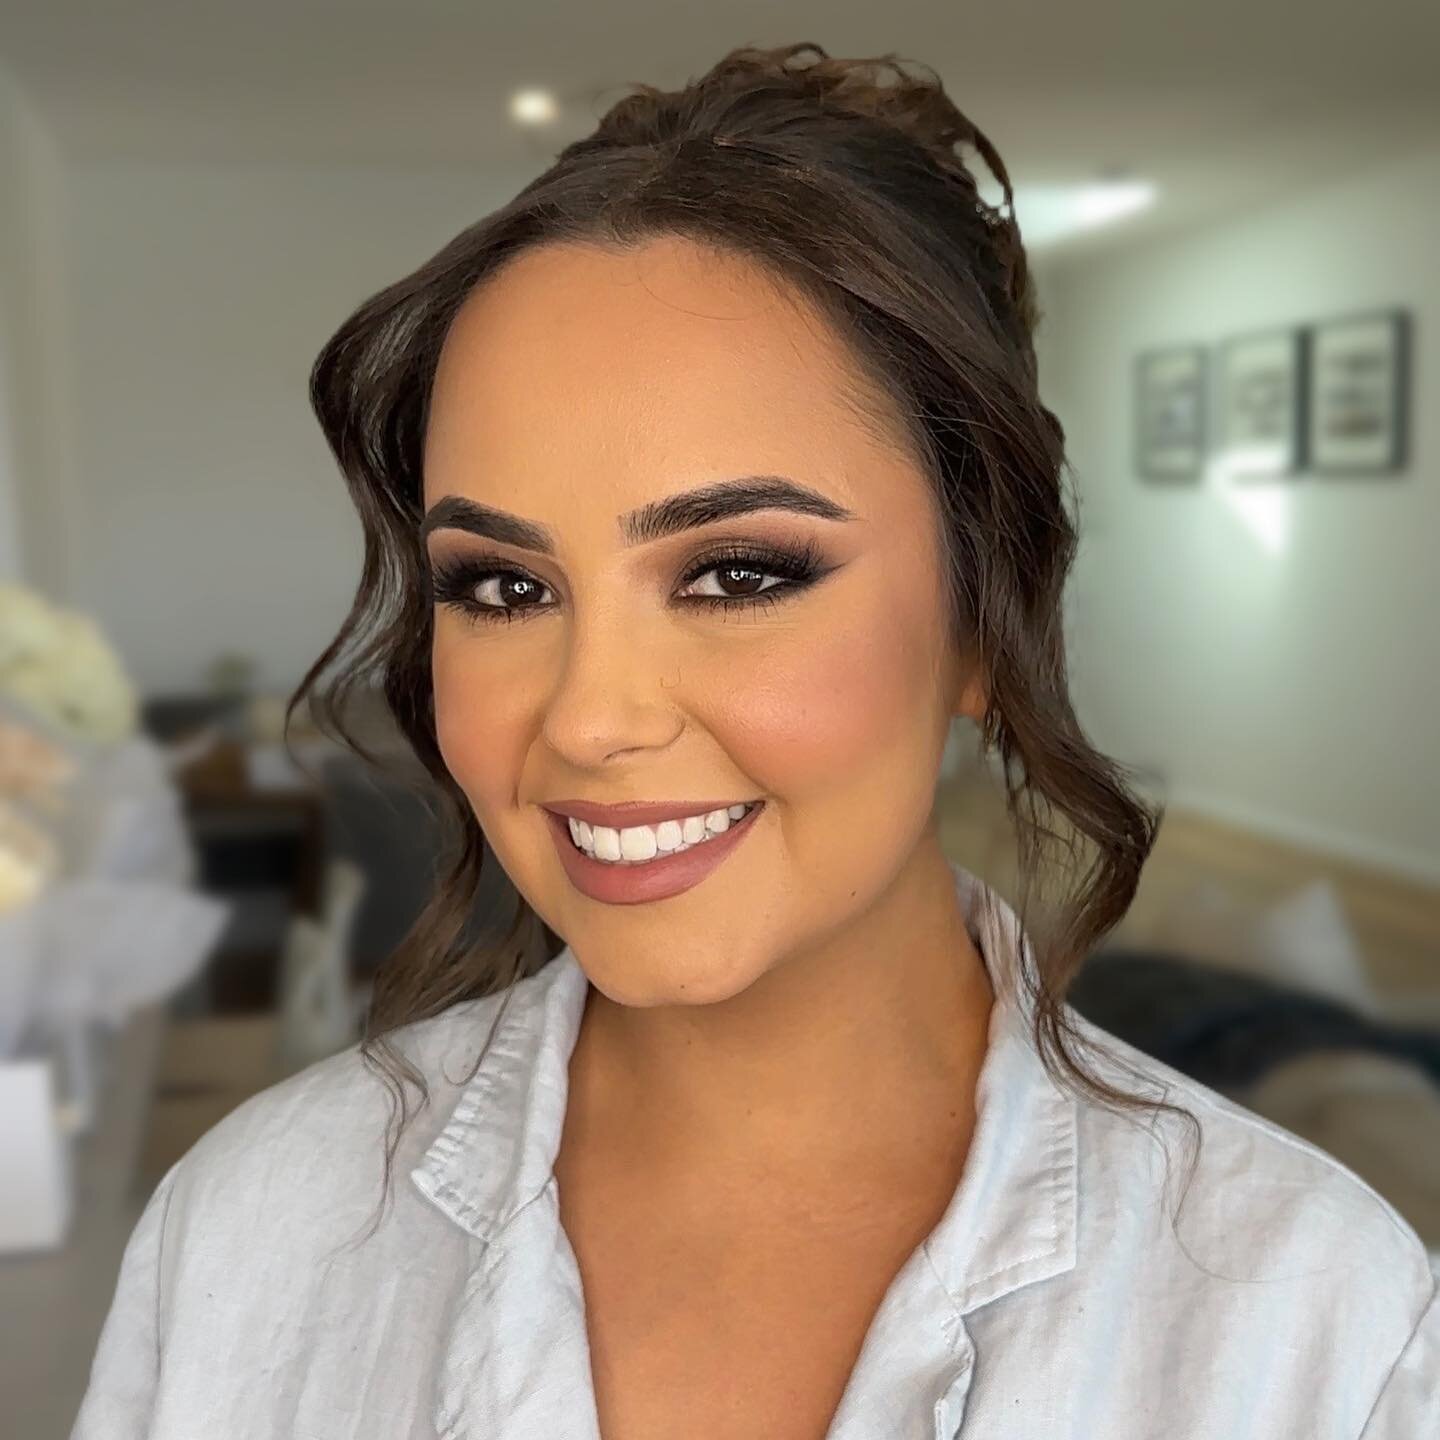 She&rsquo;s iconic 🙌 
The hair and makeup duo @hairbyjeandarkchidiac &amp; @bychloe.makeup  for Isy&rsquo;s stunning bridal party. 

Get in touch today to enquire for your date. Visit www.beautyaesthetix.com